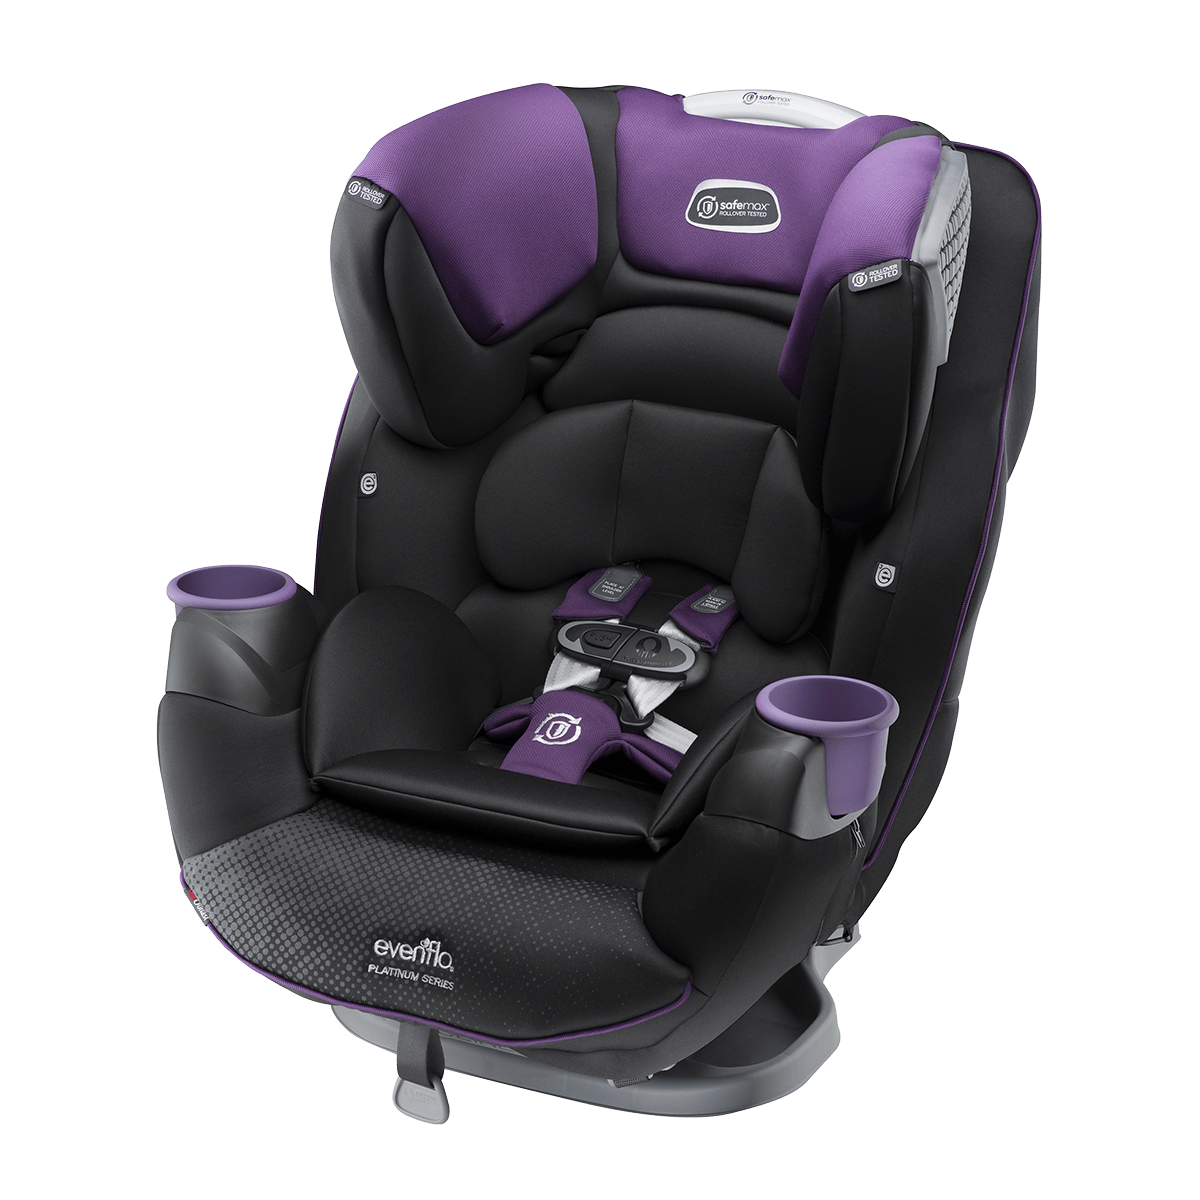 Convertible Car Seat Review: Evenflo SafeMax All-in-One